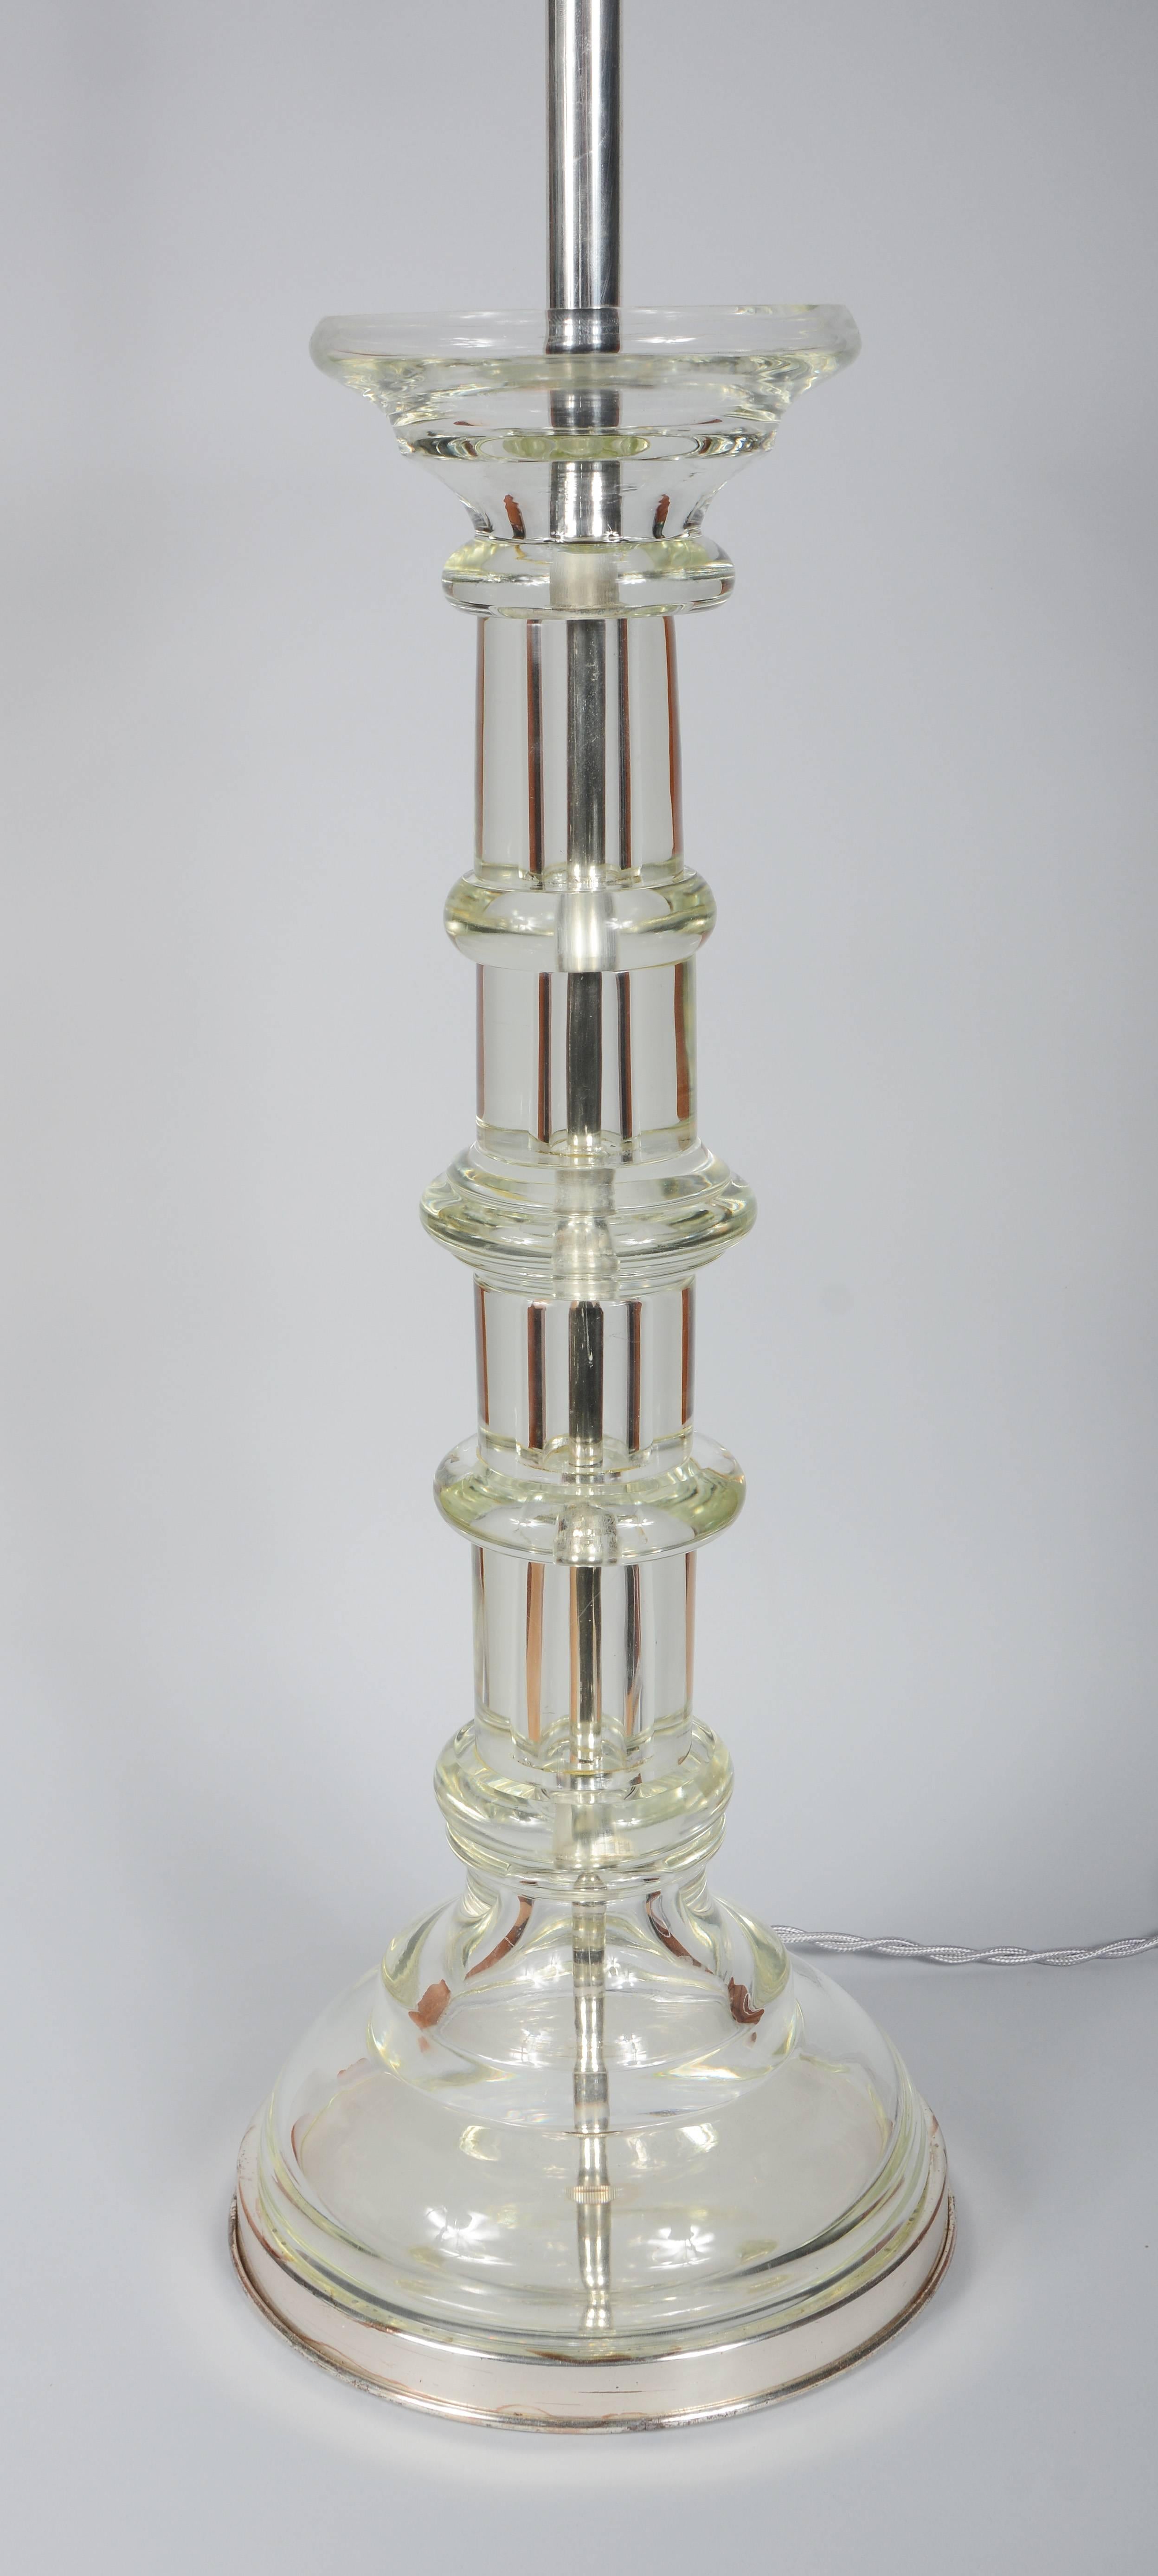 Tall glass column table lamp by Marbro. The metal components on this lamp are silver plated with exception of the pull chains. The lamp has a new twisted silver rayon cord.